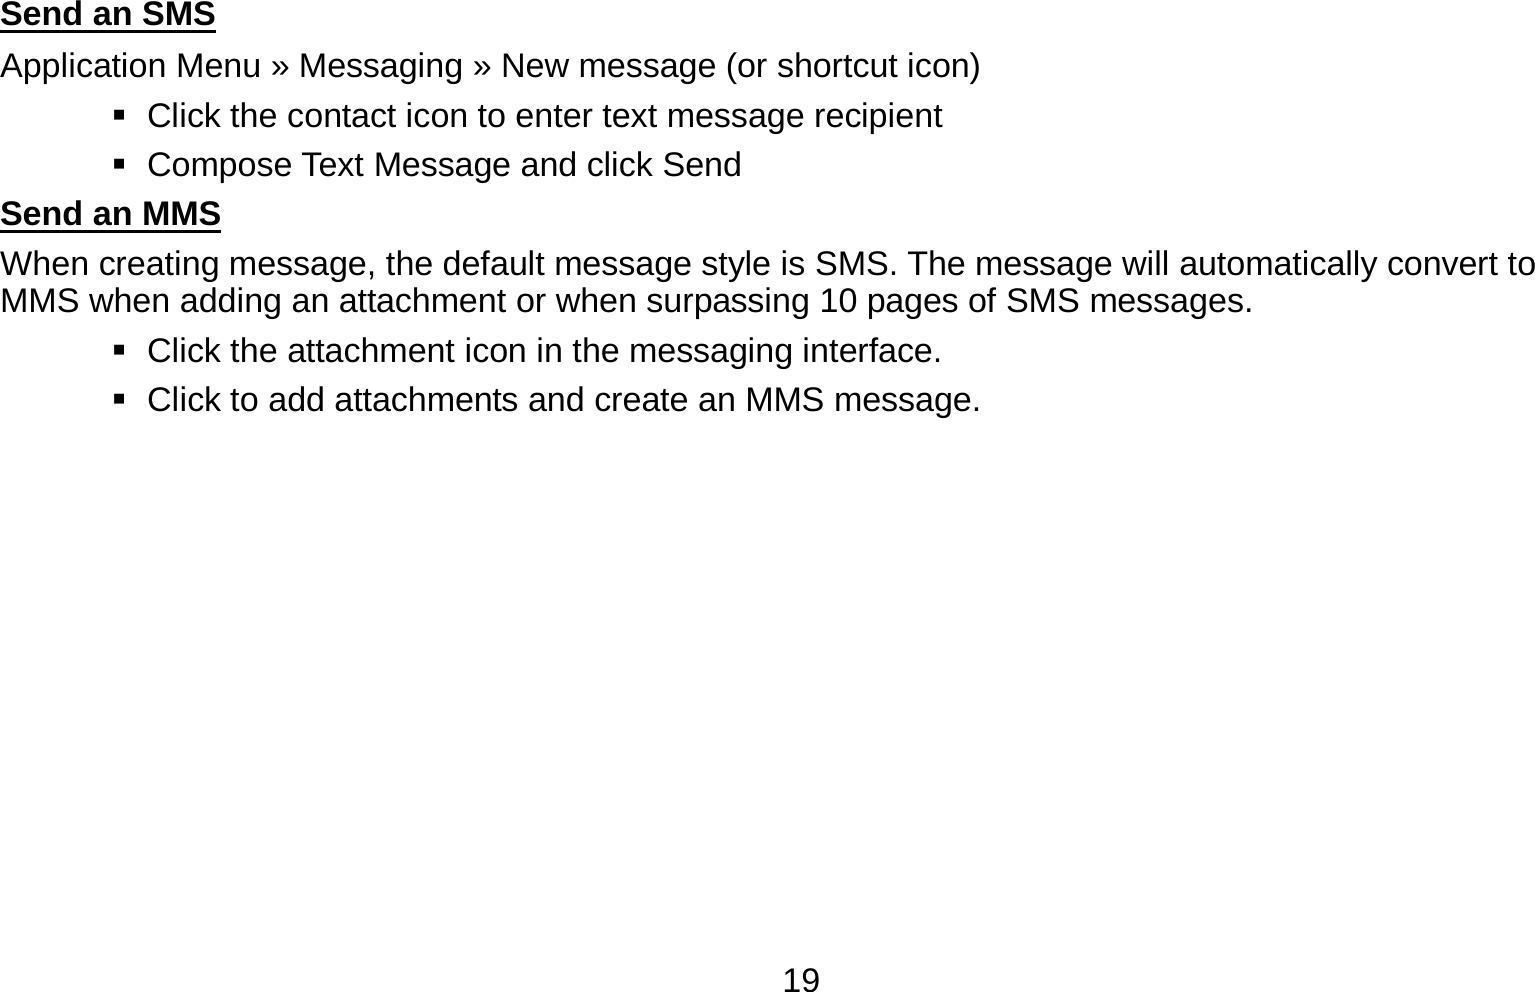   19Send an SMS                                                                                      Application Menu » Messaging » New message (or shortcut icon)      Click the contact icon to enter text message recipient      Compose Text Message and click Send Send an MMS                                                                                      When creating message, the default message style is SMS. The message will automatically convert to MMS when adding an attachment or when surpassing 10 pages of SMS messages.      Click the attachment icon in the messaging interface.    Click to add attachments and create an MMS message. 